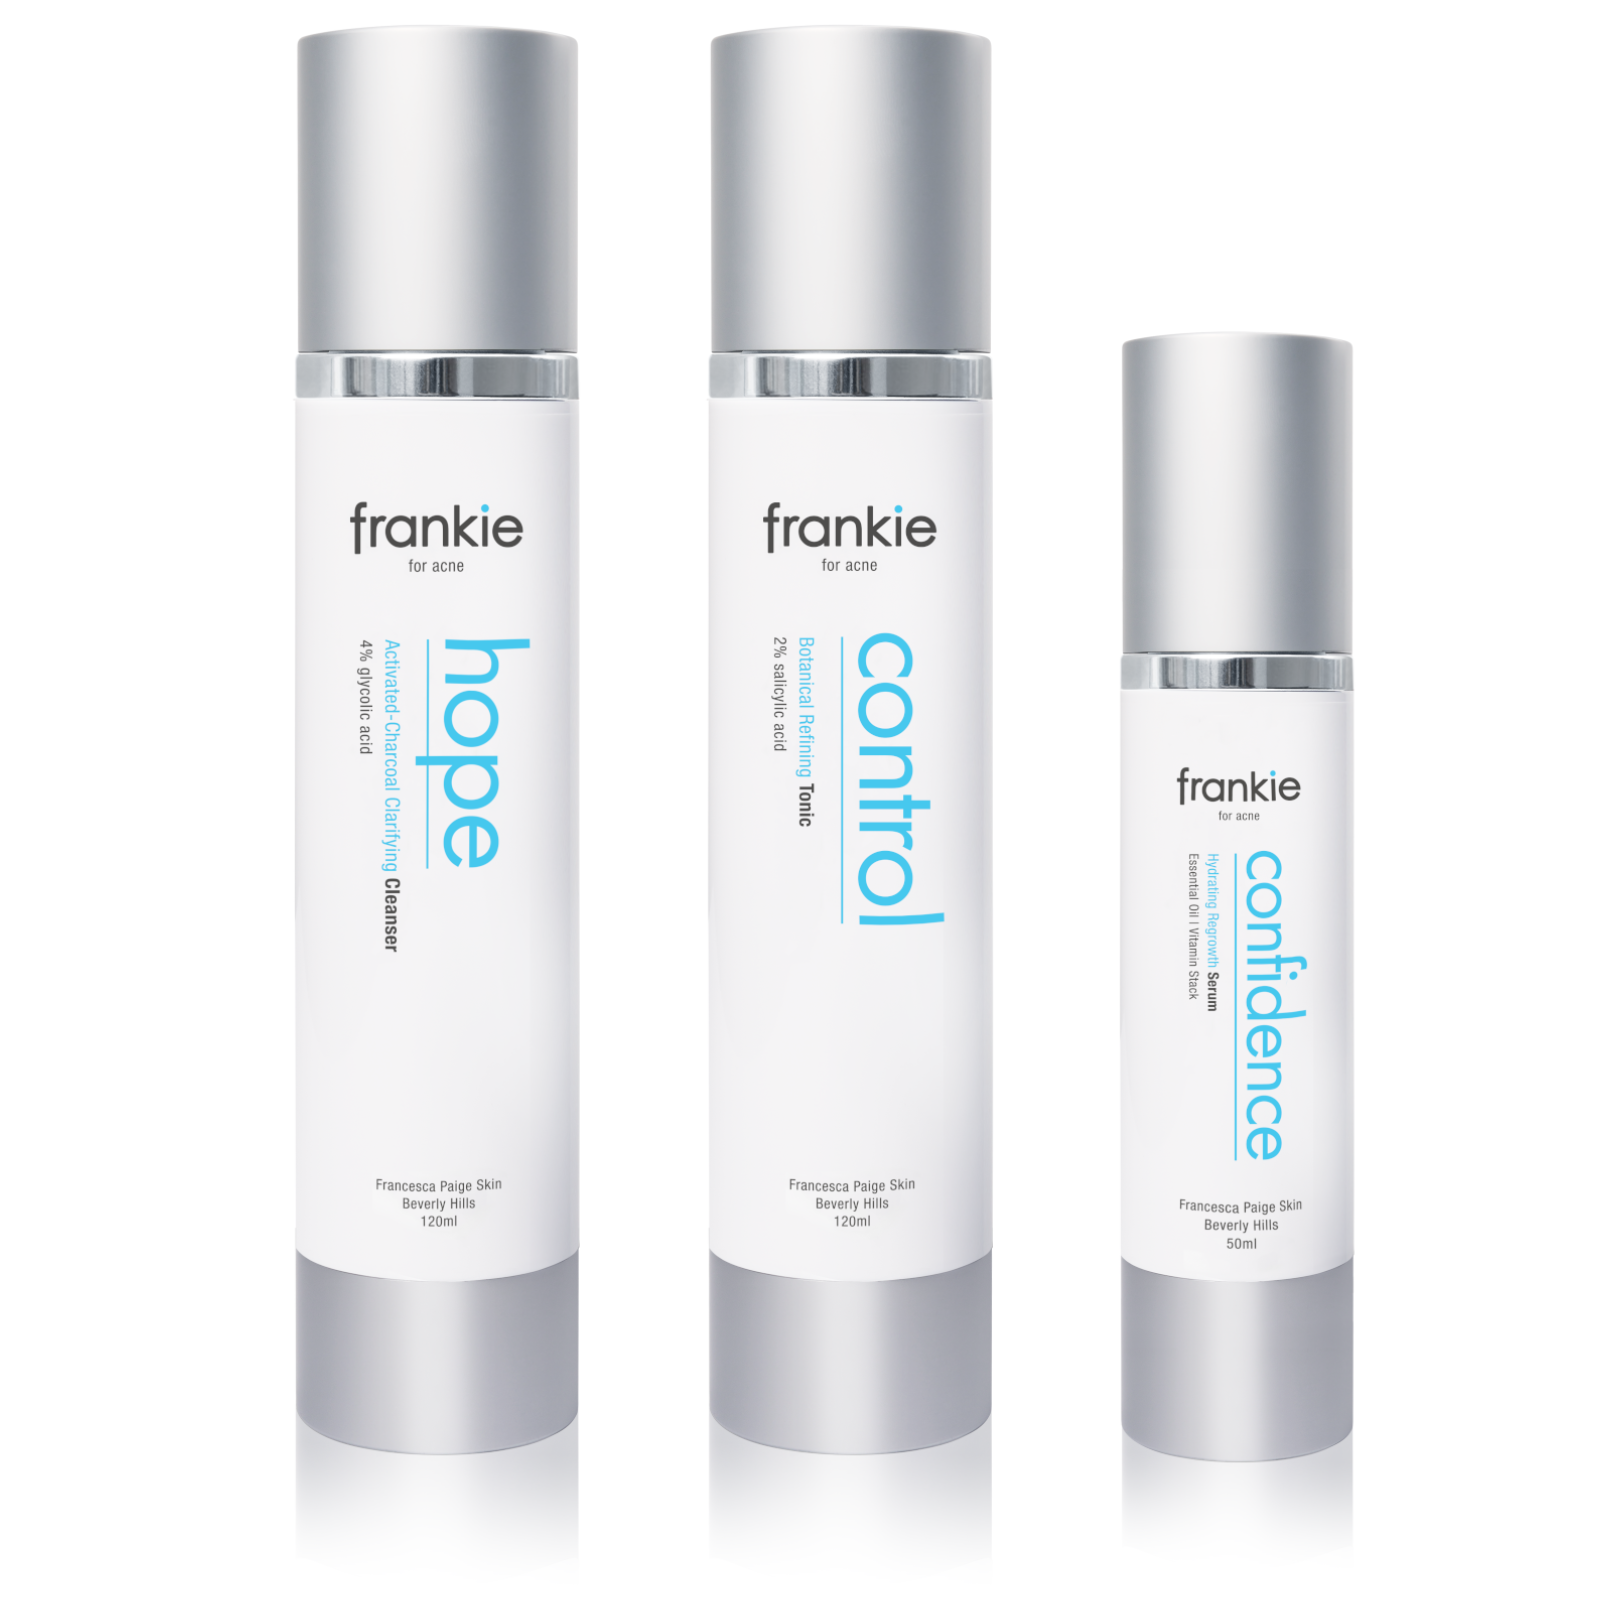 Frankie for Acne by FP Skin clears blackheads with salicylic acid, zinc, activated charcoal, calendula and retinol removes pimples